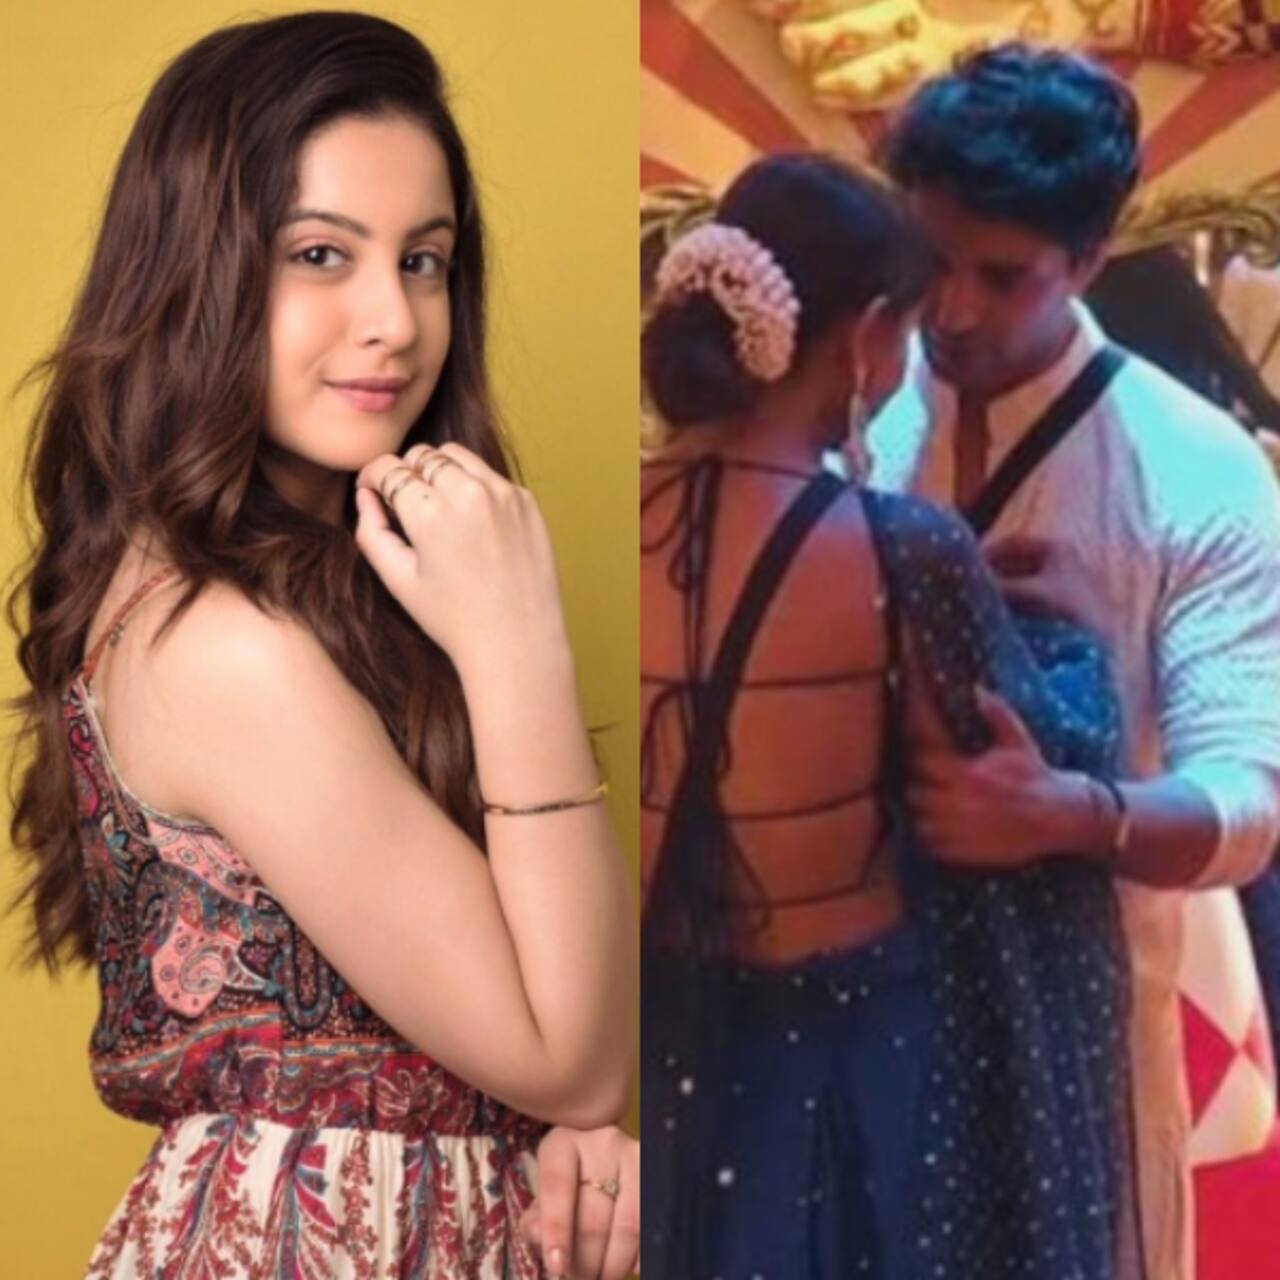 Trending TV News Today: Bigg Boss 16 makers face anger of Priyanka Chahar Choudhary and Ankit Gupta fans, Tunisha Sharma dies by suicide and more